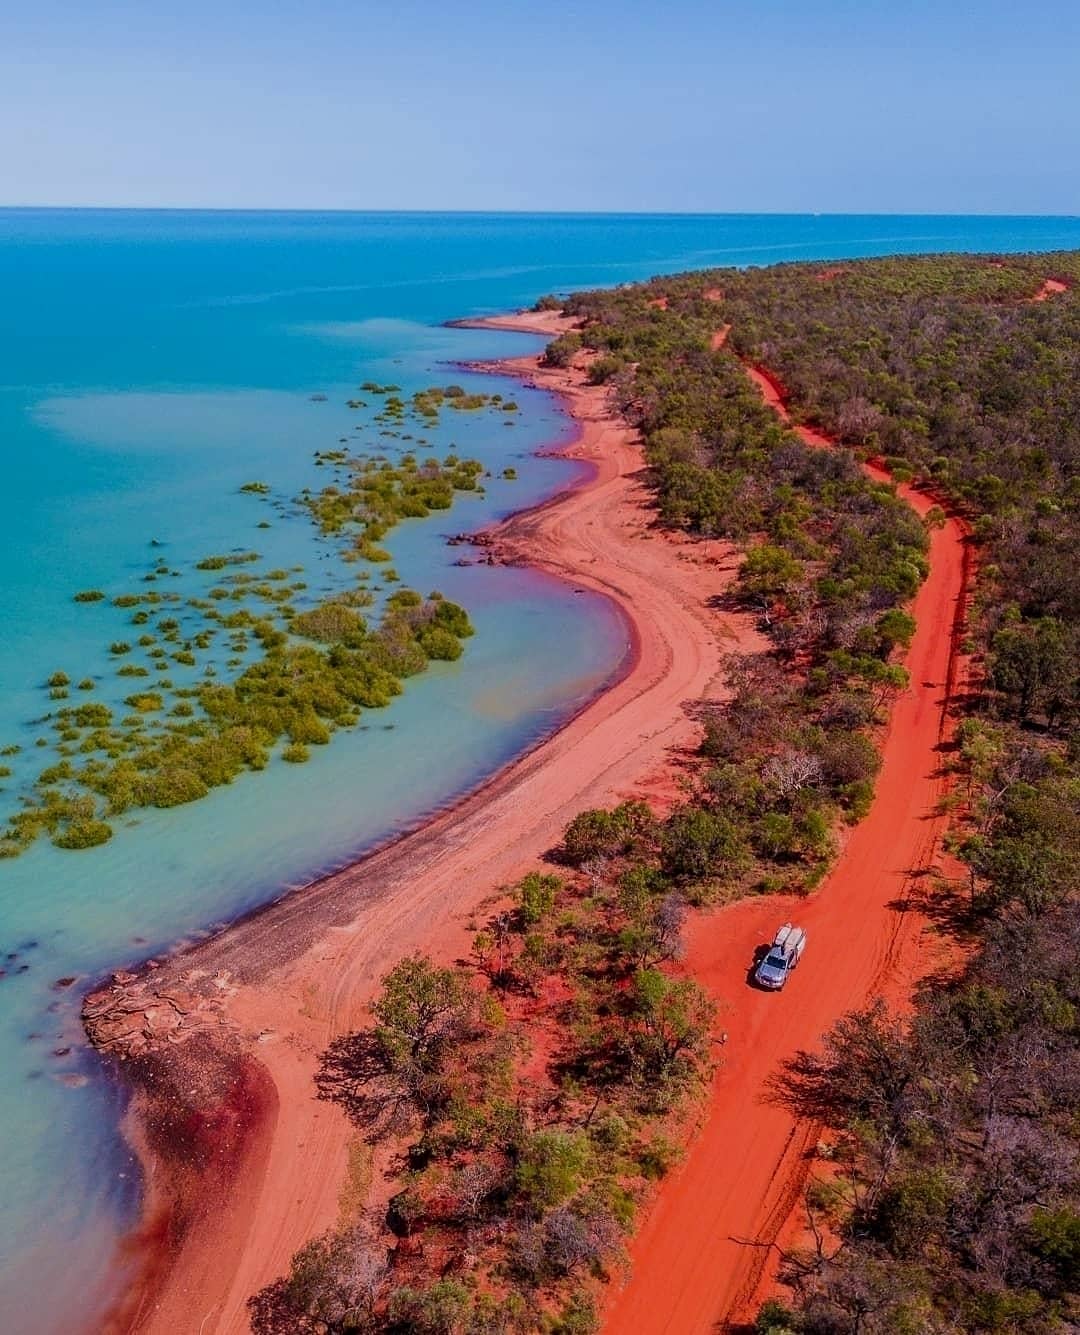 Straya's Red Planet
➡Reposted from @australia_worldlover -  In the mood for a colourful road trip? Steer your wheel towards  in @westernaustralia! 🚗 The magical landscape is so captivating here that according to @theblondenomads: “we planned to stay in Broome for only a few days... and 2 weeks later we are still here!” Expect turquoise waters and rich red earth with beautiful pockets of rainforest along the coast in this part of @australiasnorthwest. Once you get into town, book a guided tour with @narlijia to see the mangrove, or a kayak tour with @broomeadventure to paddle with turtles and discover remote beaches. Yep, definitely sounds like you can easily spend a couple of weeks here 😉

FOLLOW 👇👇👇👇@australia_worldlover 🔥
🔽🔽🔽
👇
😂
😉 📷  @australia
😘
#australia
#australianart #thisiswa #australianlife #australianartist #discoverqueensland #australianopen #australianfashion #nsw #australiaday #thisisqueensland #ig_australia #visitmelbourne #seeaustralia #melbourne #perth #ilovesydney #queensland #goldcoast #newsouthwales